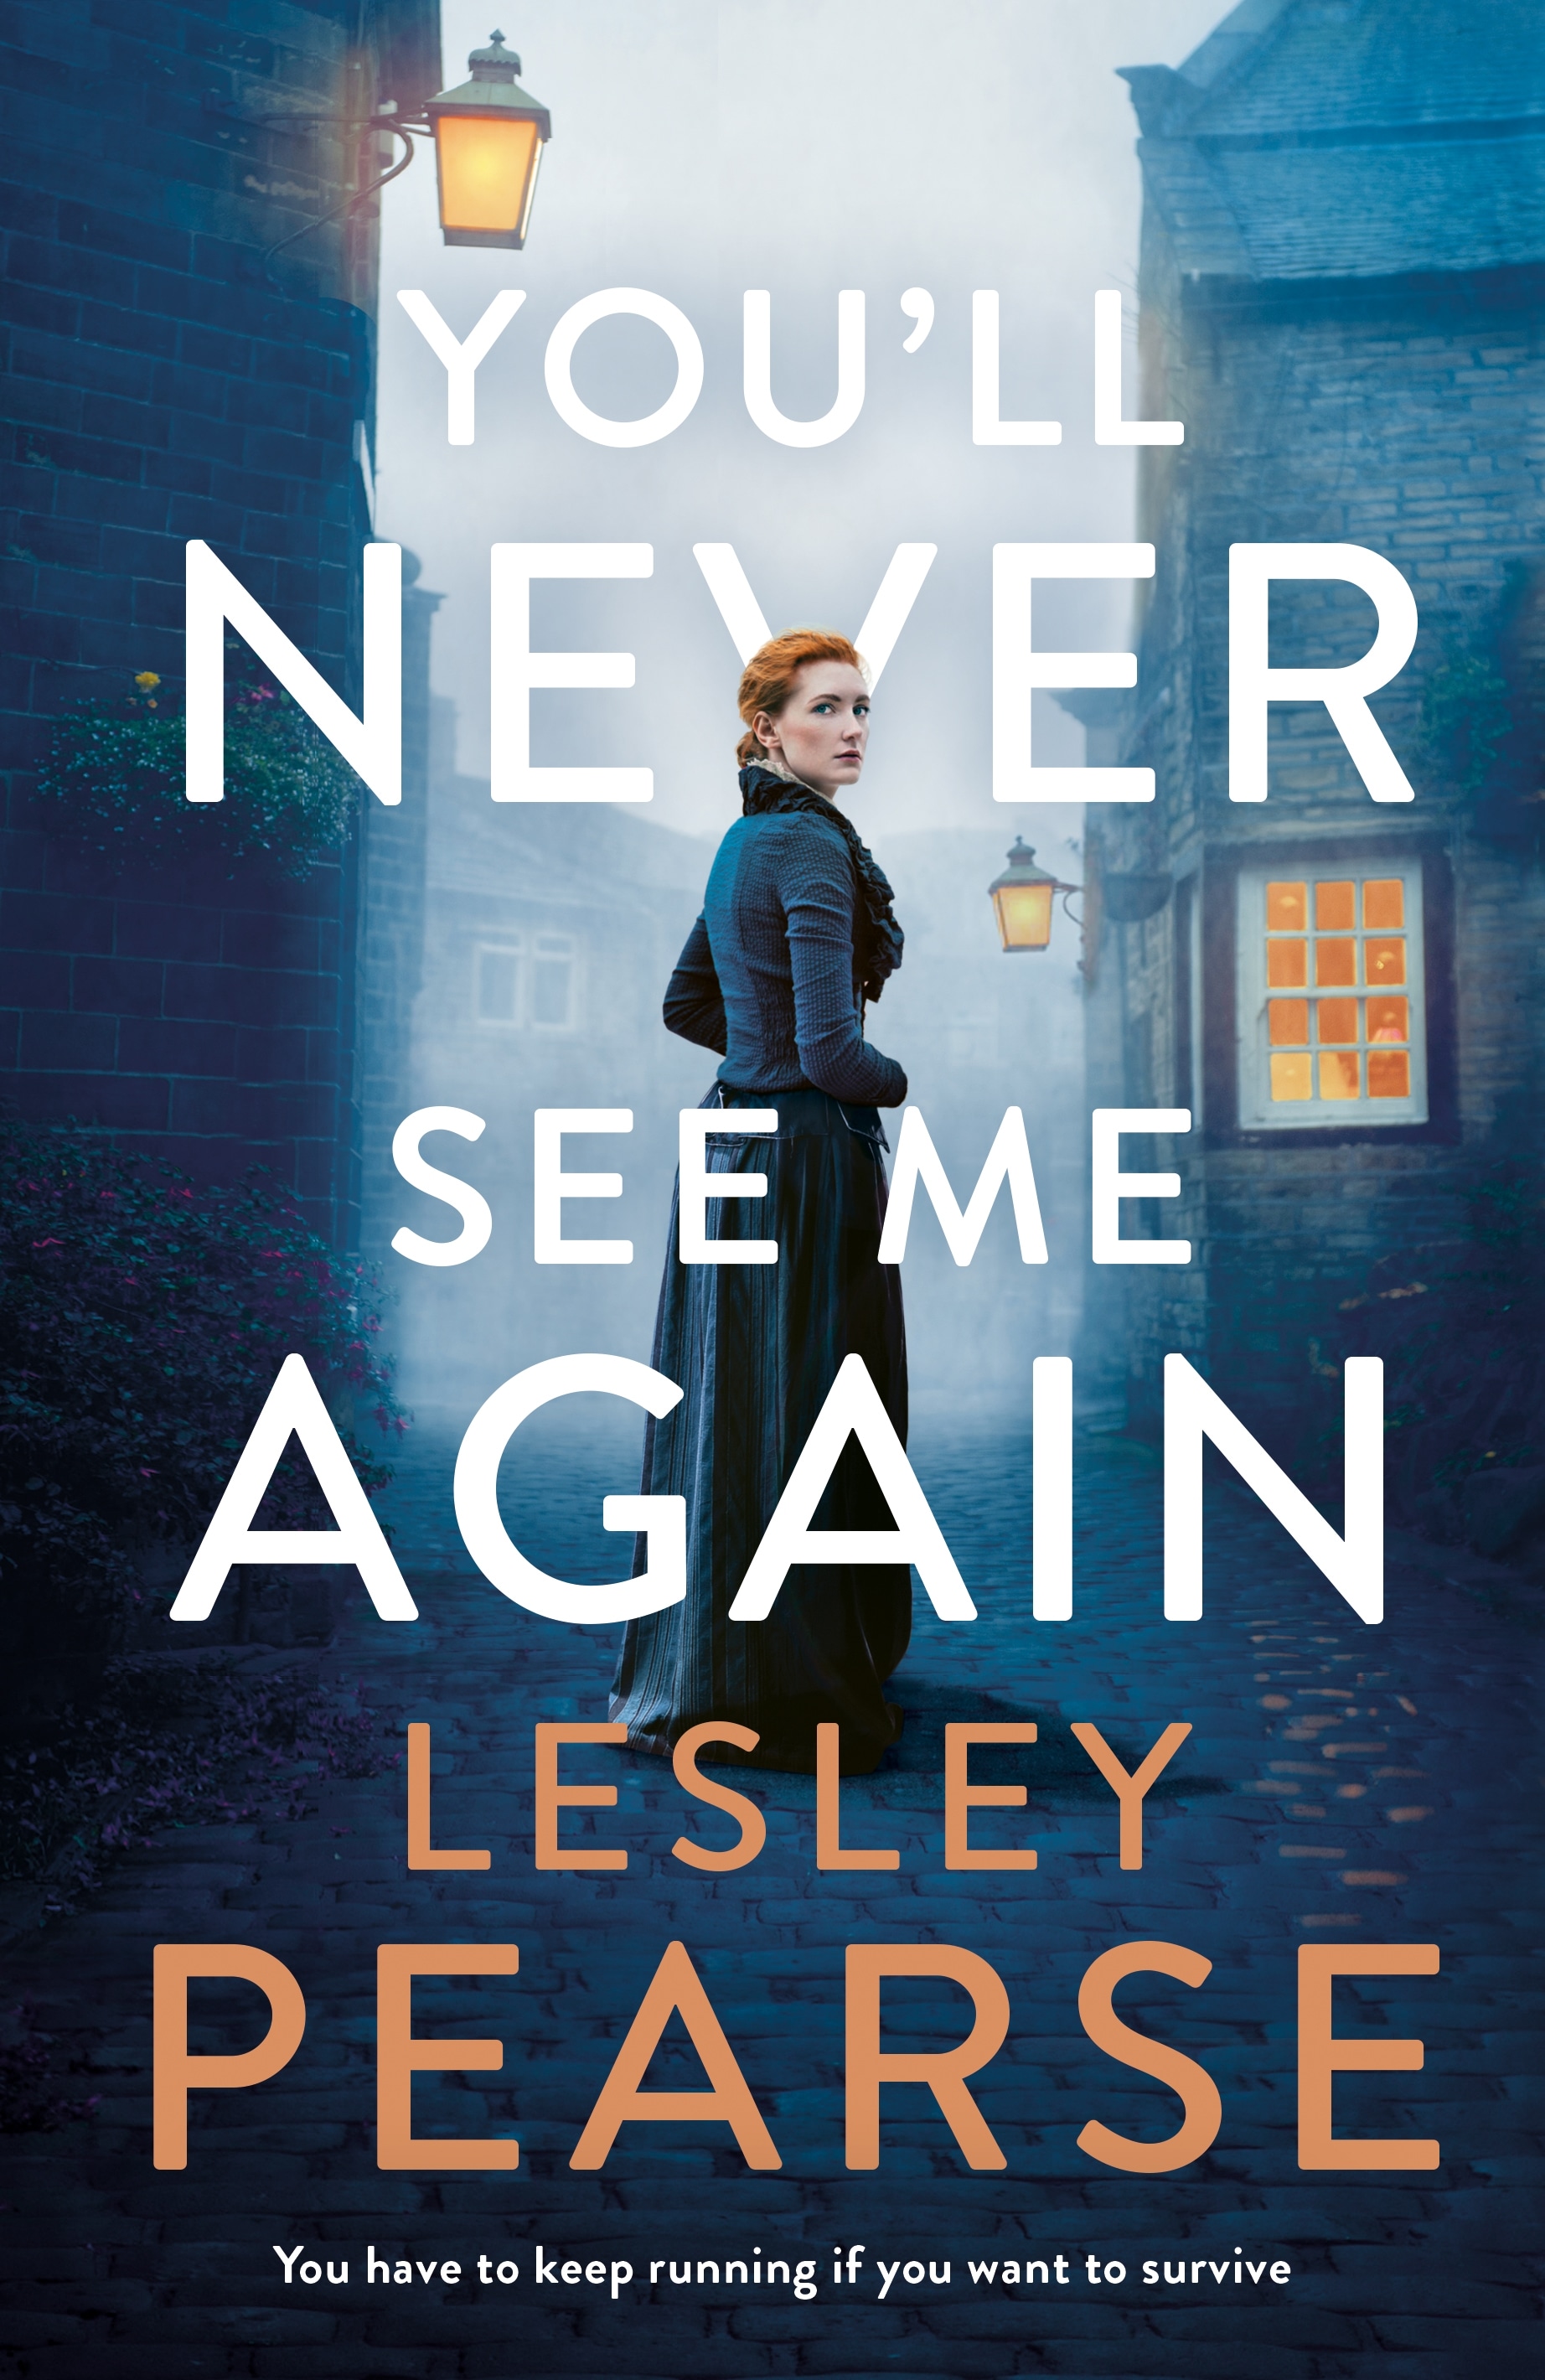 Book “You'll Never See Me Again” by Lesley Pearse — June 27, 2019